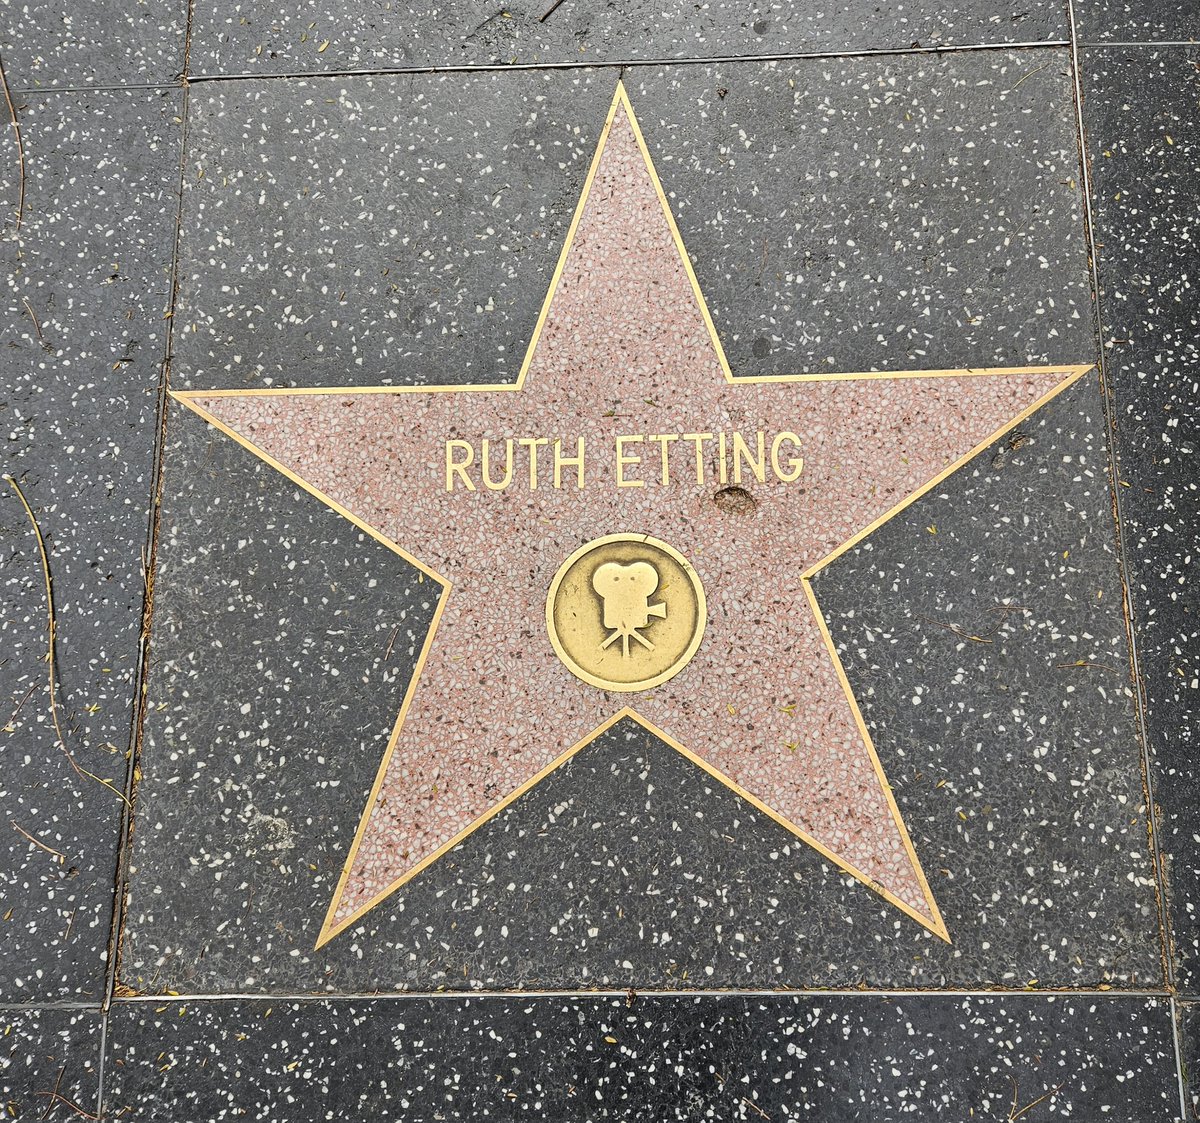 In West Hollywood for a friend's memorial. The venue is a couple blocks from Ruth Ettings star. She was a movie and music star in the 1920s. She married a mobster, moved to Colorado Springs, Colorado, where she babysat my father in the 1930s.